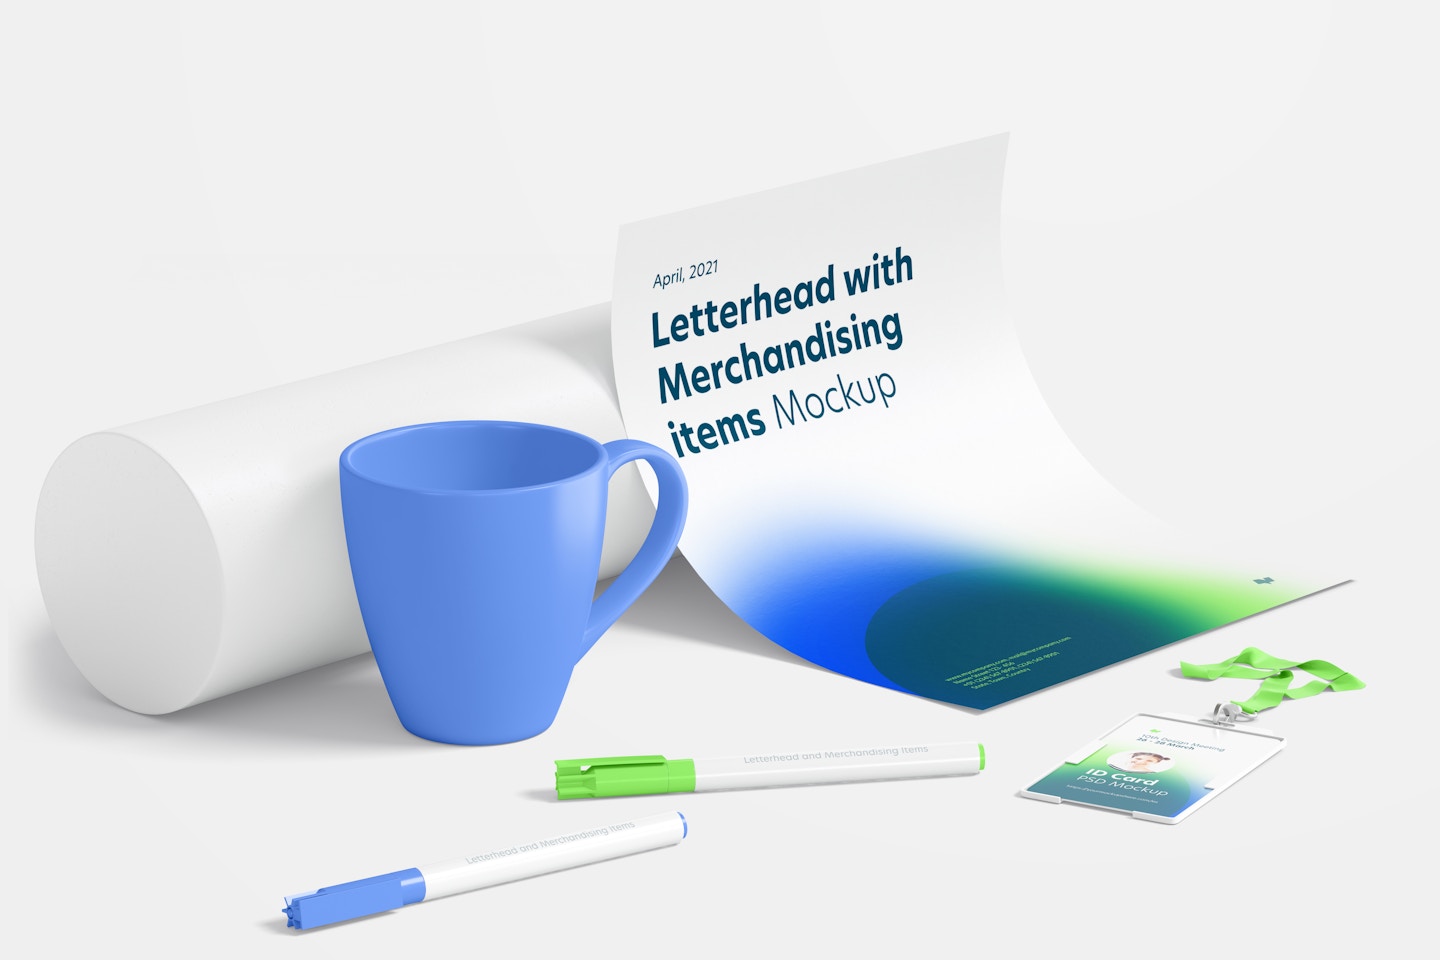 Letterhead and Merchandising Items Mockup, Side View